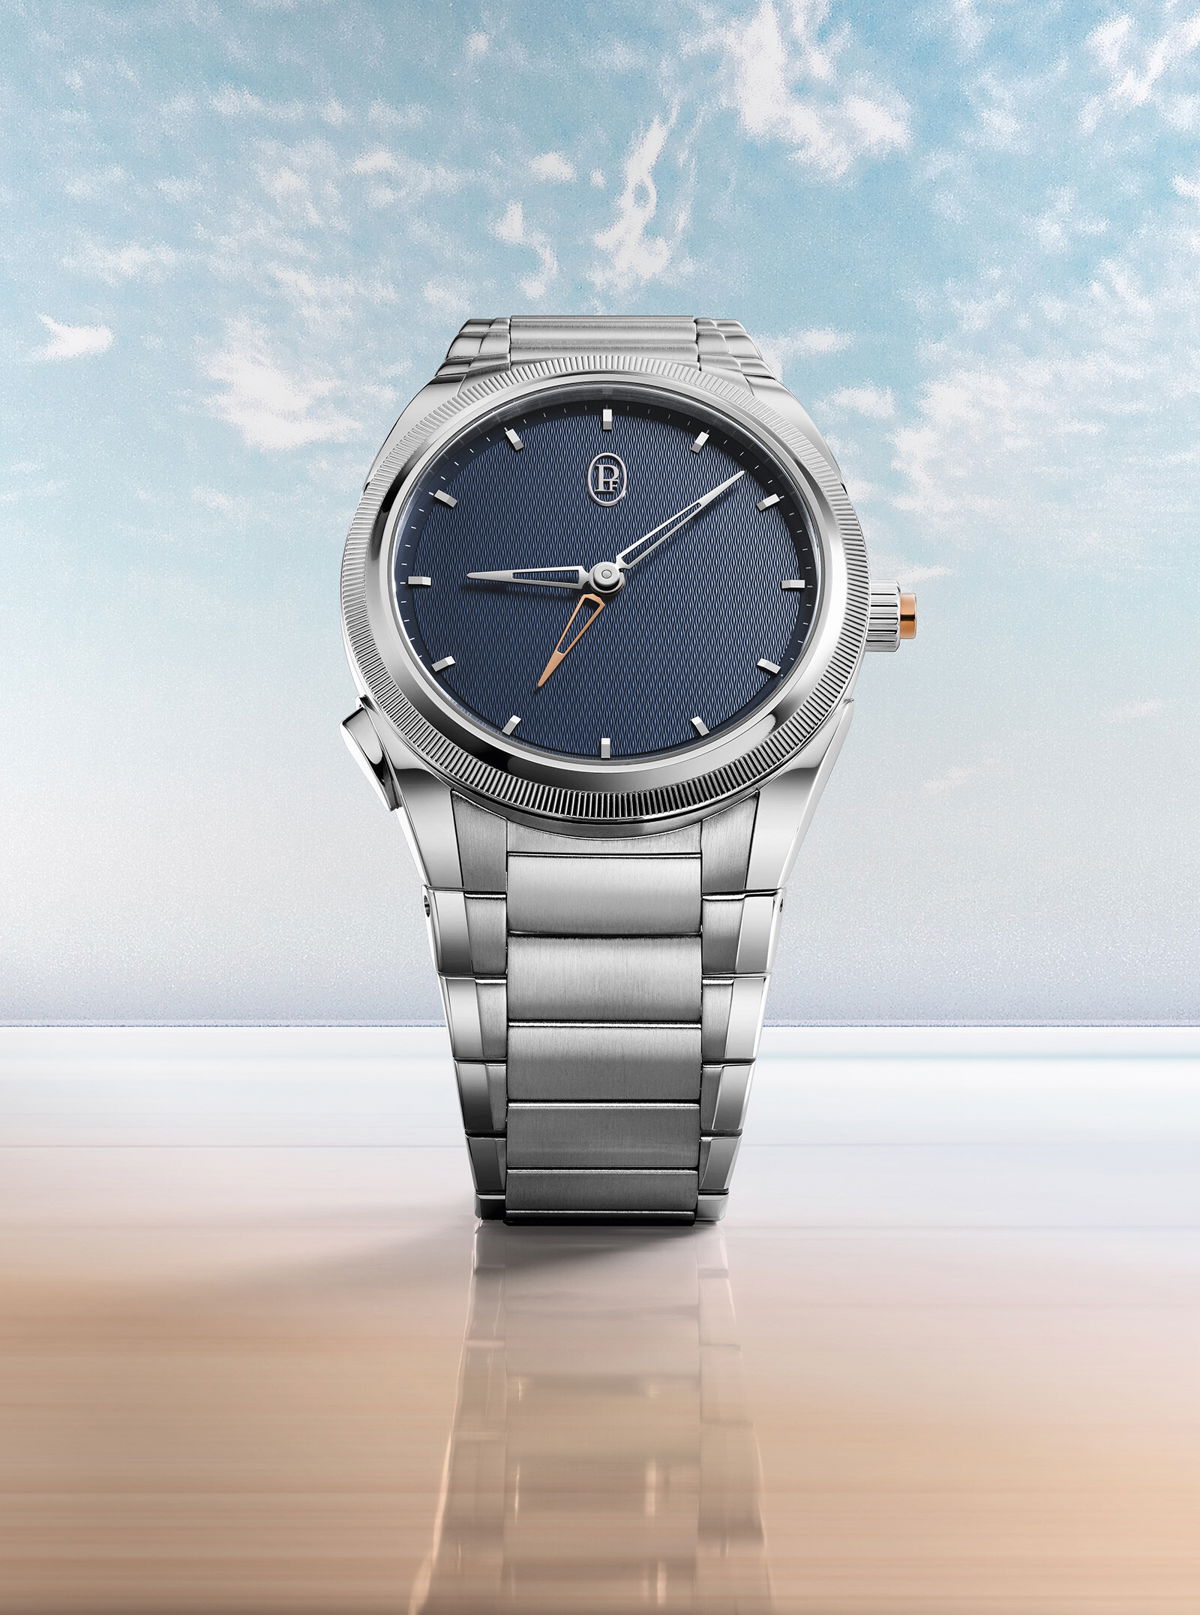 <i>Parmigiani Fleurier</i><br/>The Parmigiani Tonda lets you see local and home time for those often traveling.